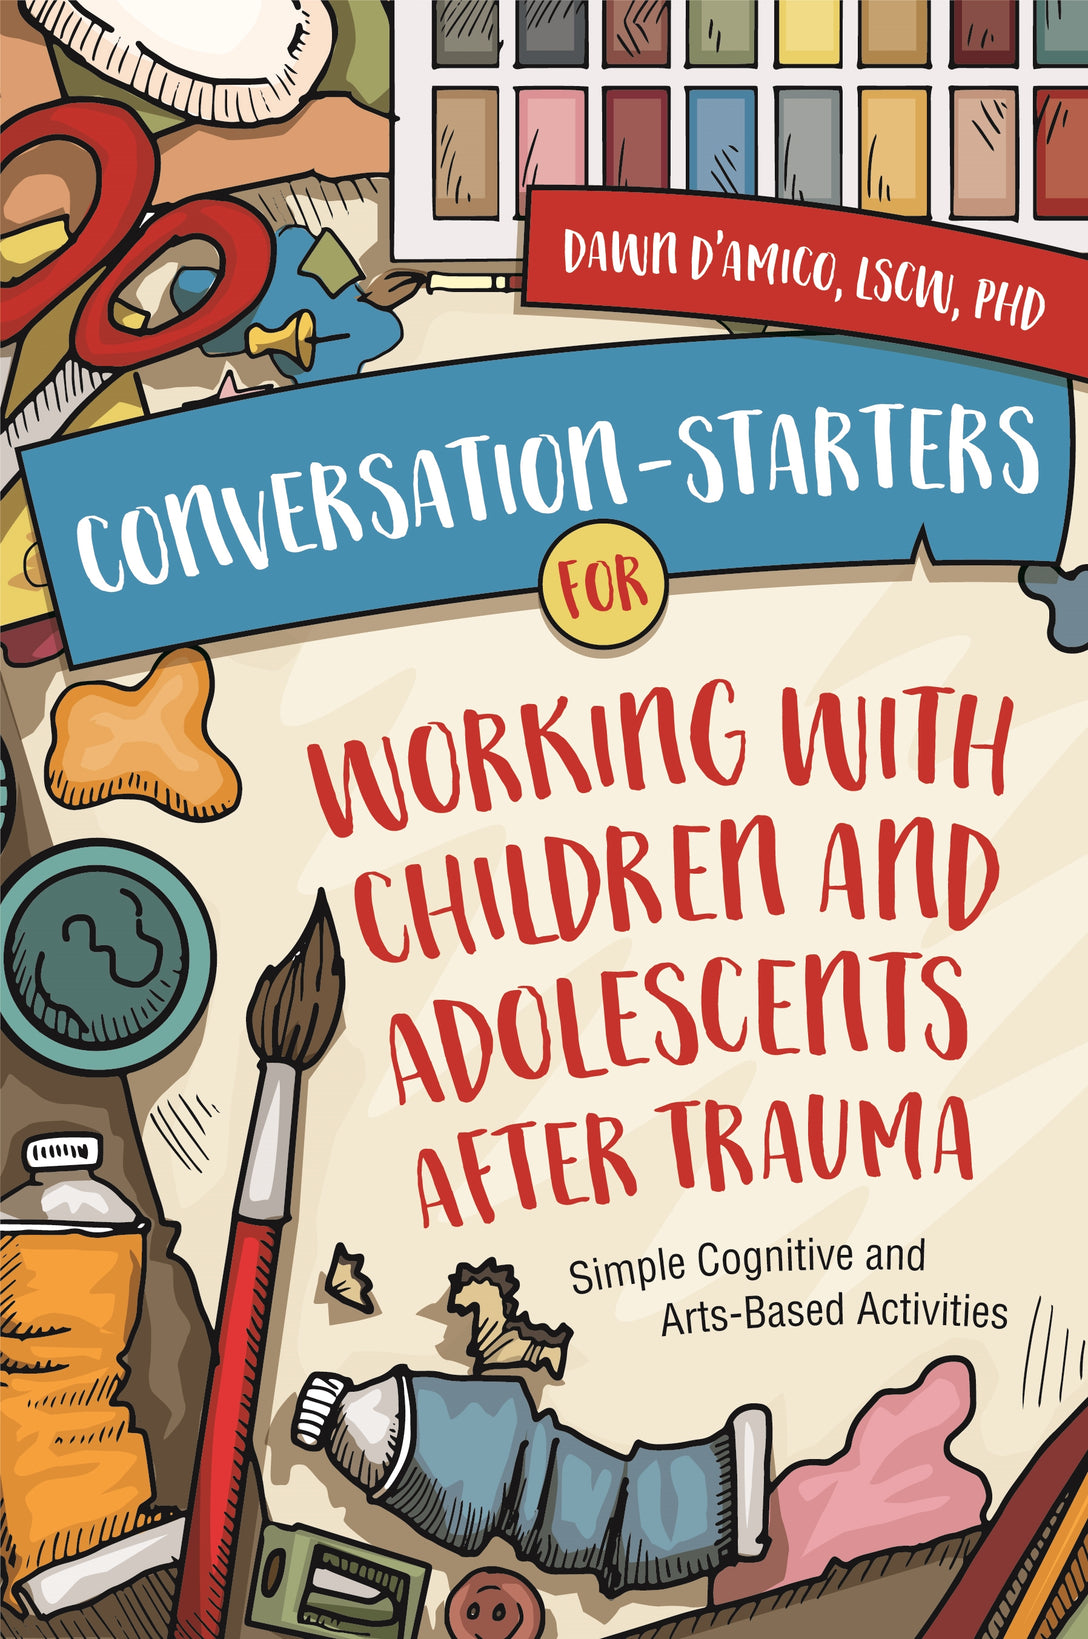 Conversation-Starters for Working with Children and Adolescents After Trauma by Dawn D'Amico